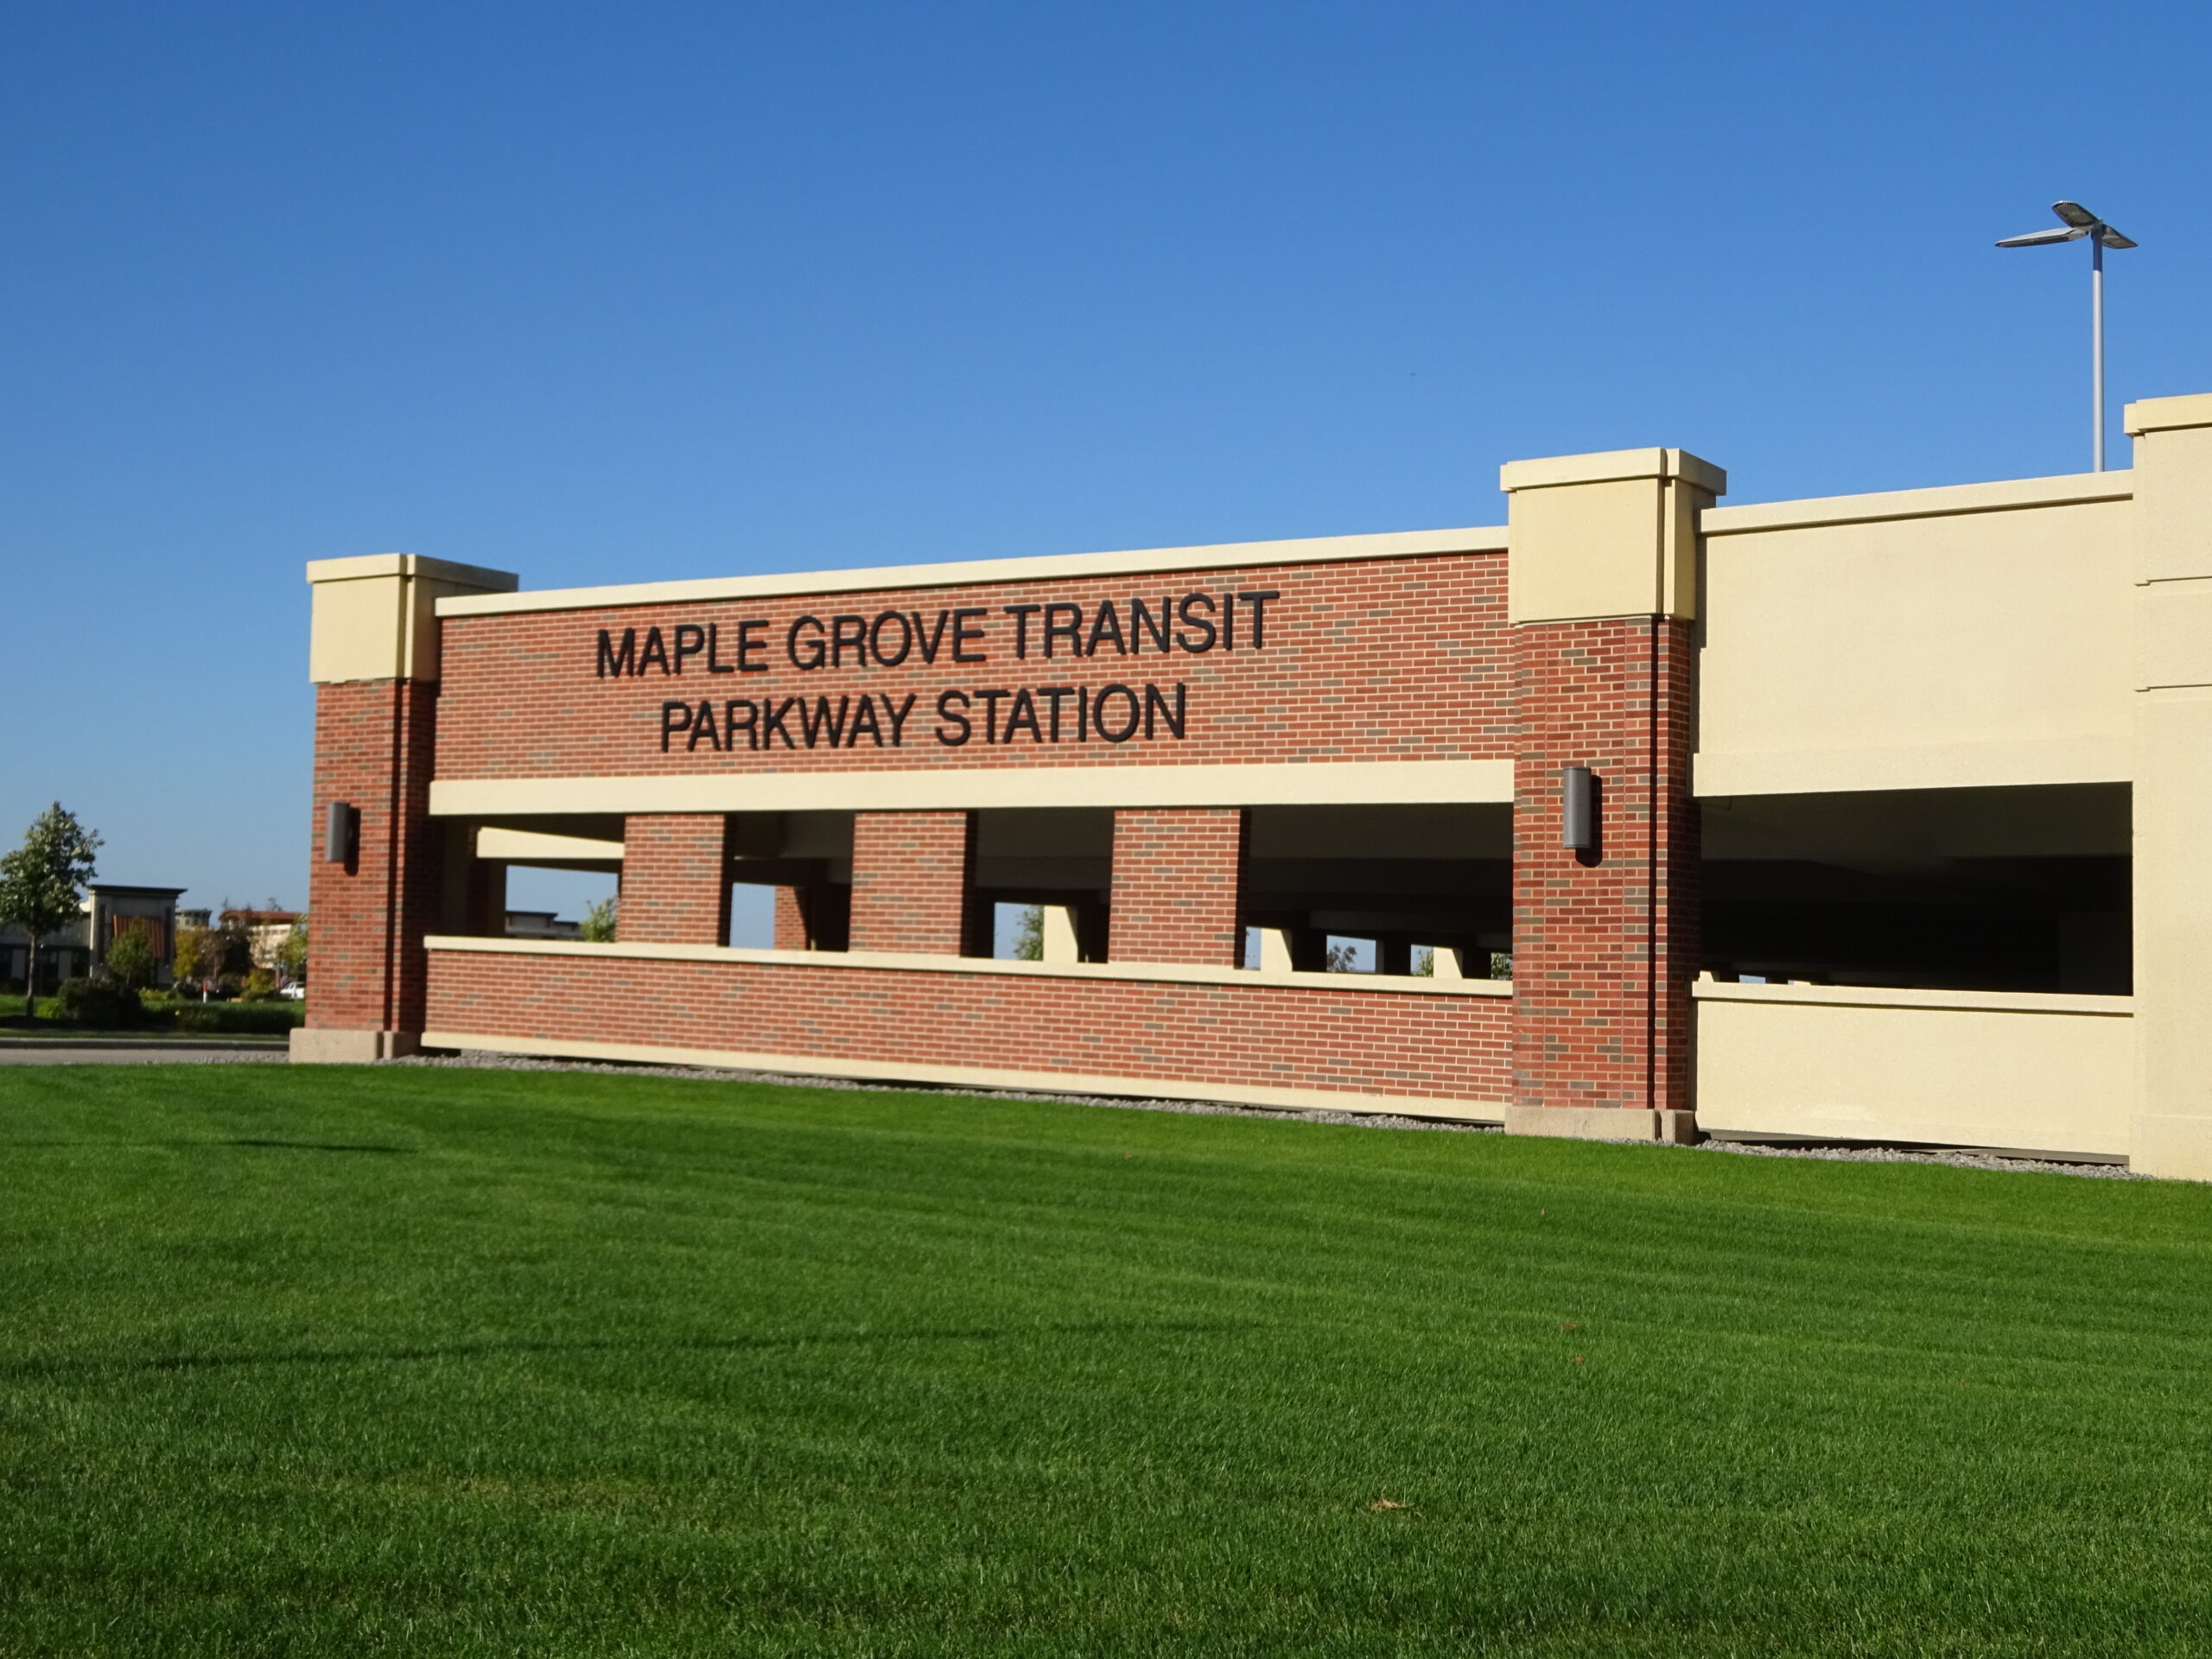 Maple Grove Transit Parkway Station